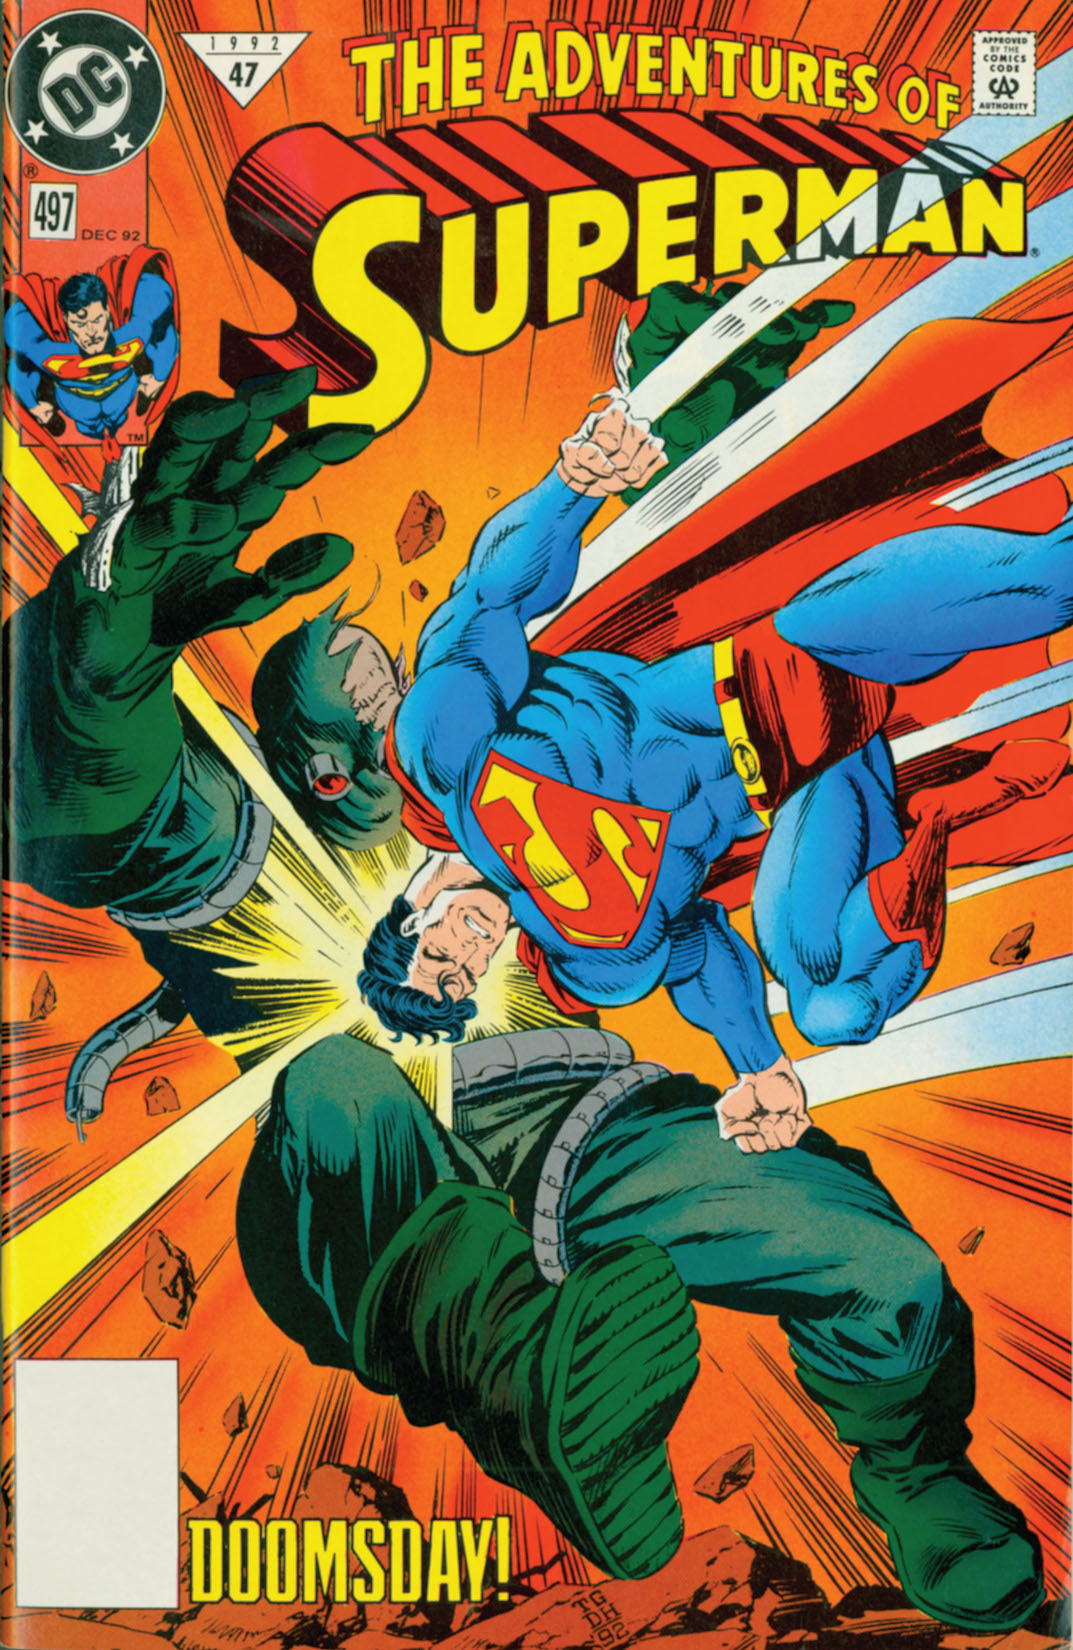 Adventures of Superman (1987-) #497 preview images